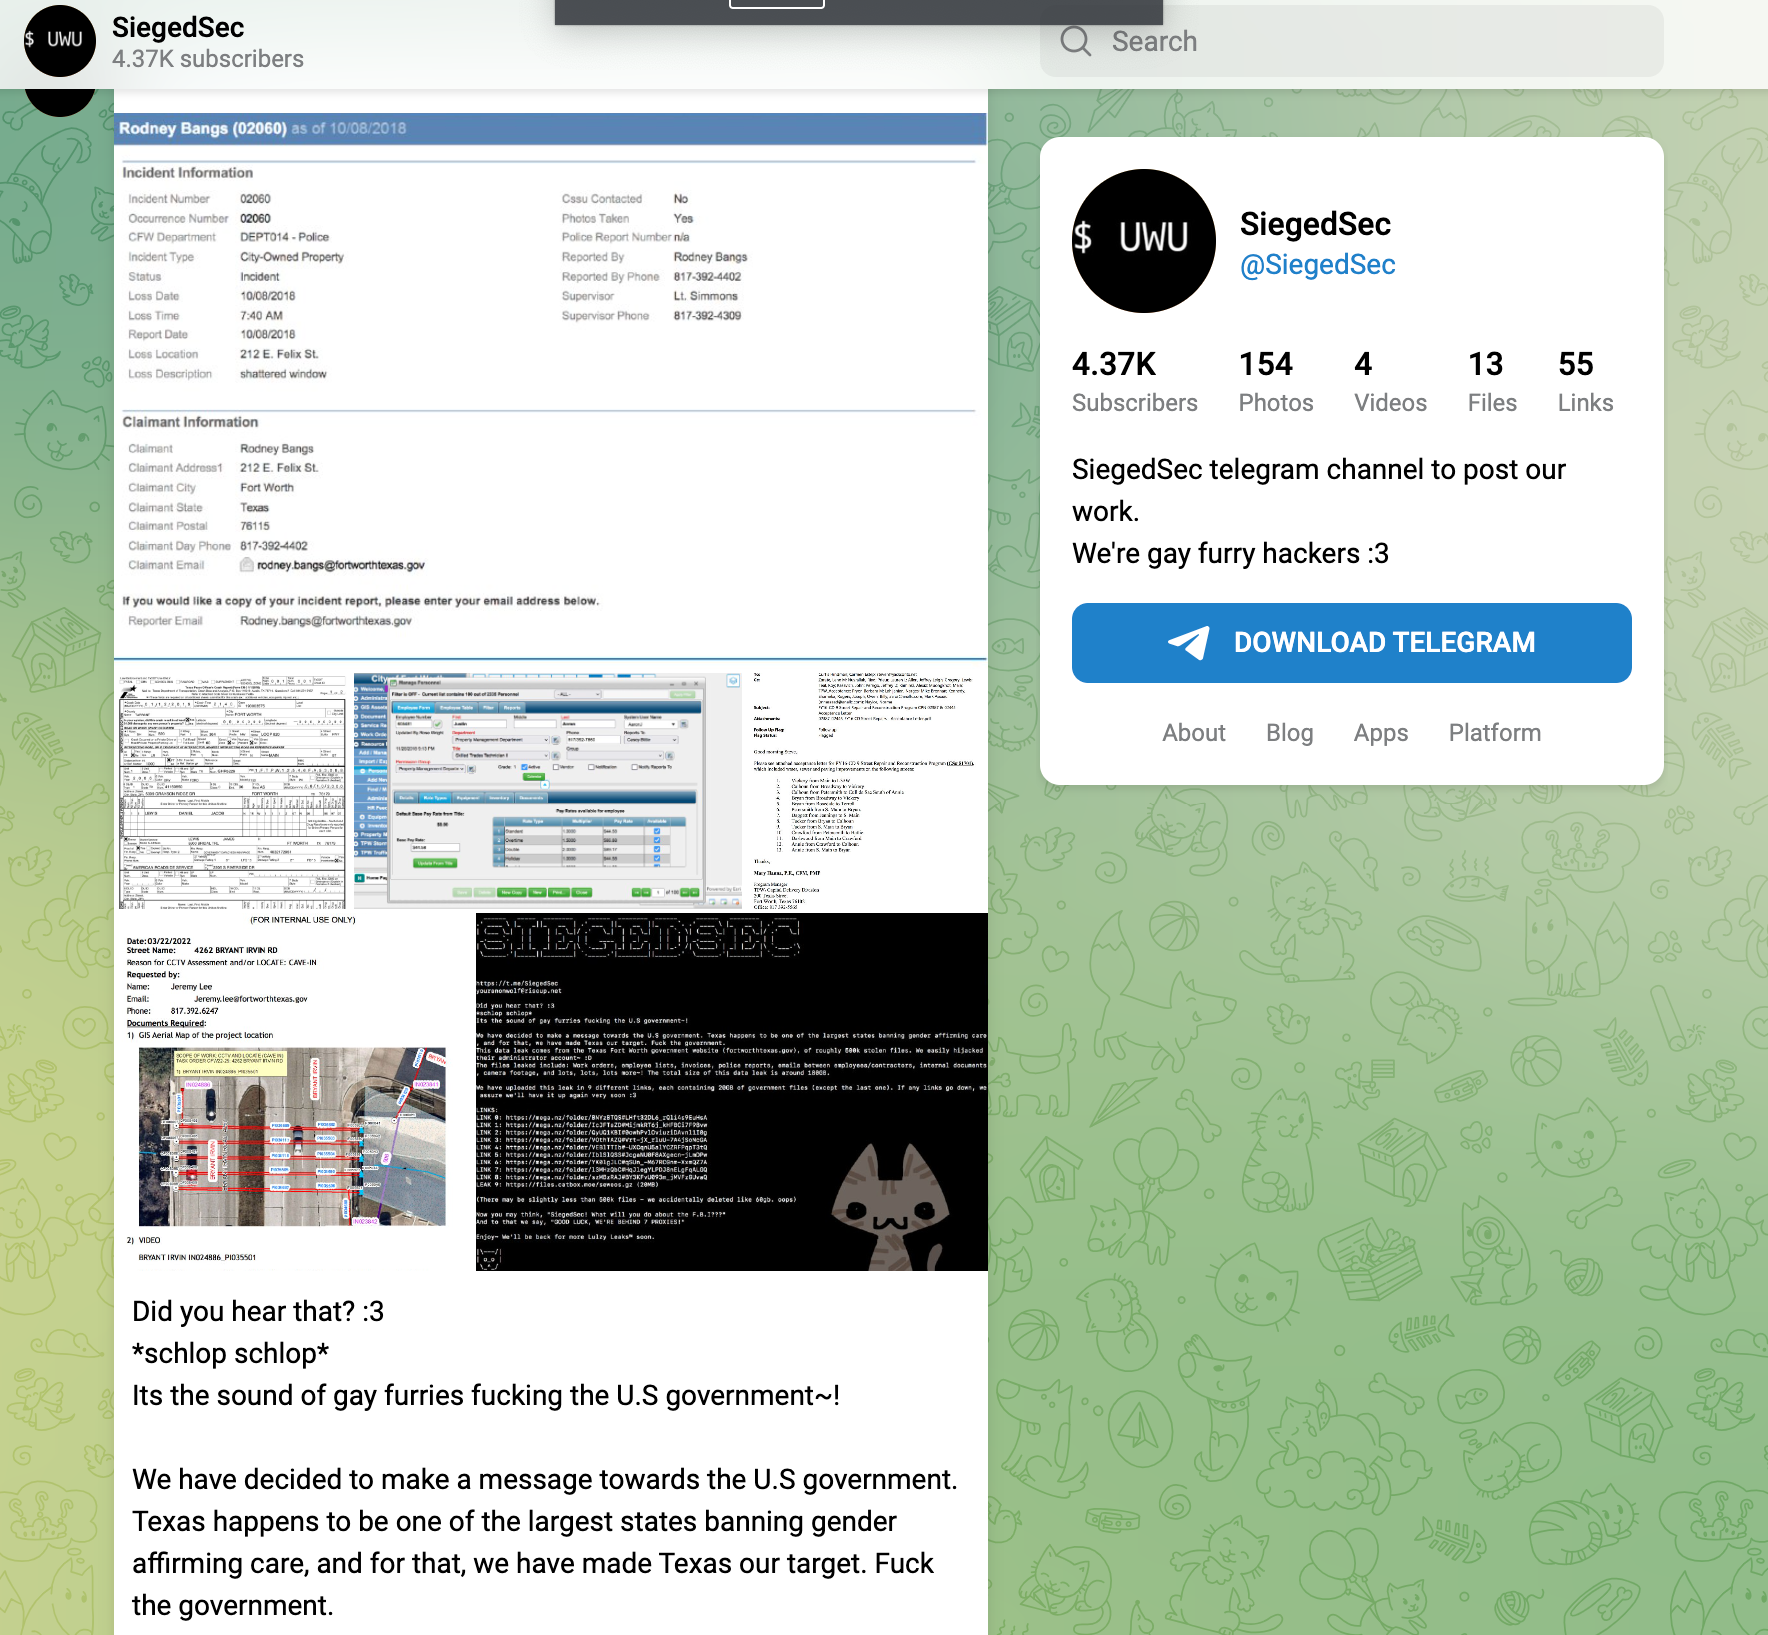 Screen Shot of SiegedSec's Telegram Page and Announcement of Fort Worth Hack